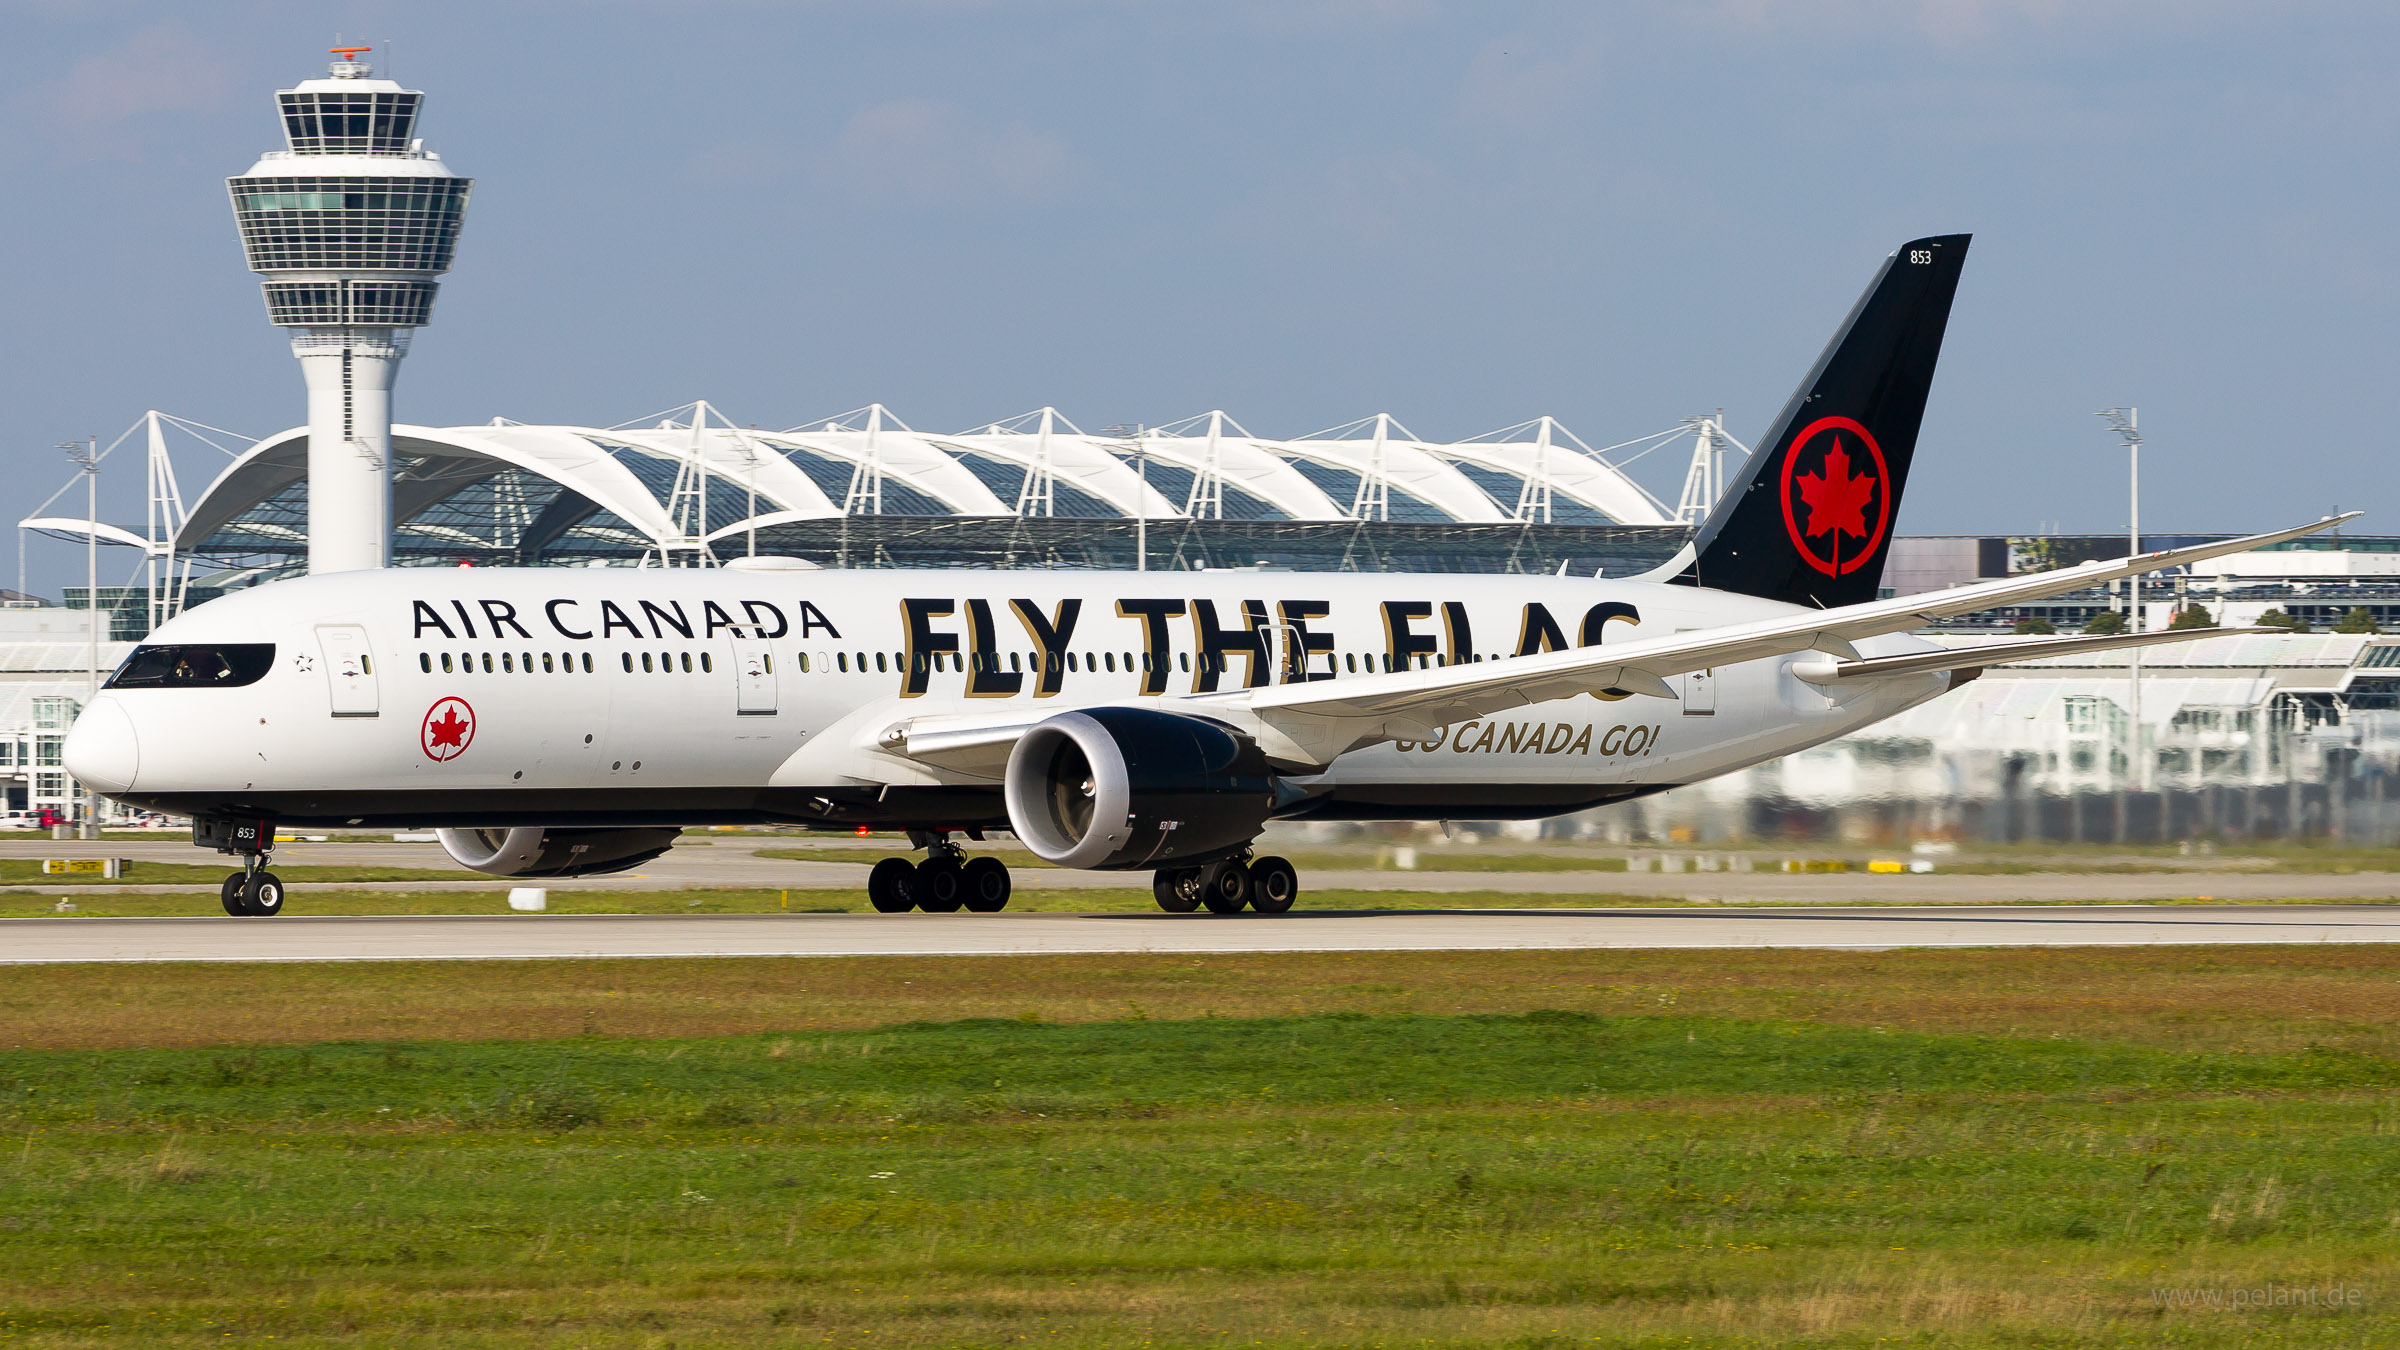 C-FVLQ Air Canada Boeing 787-9 in Mnchen / MUC (Fly the Flag Livery)